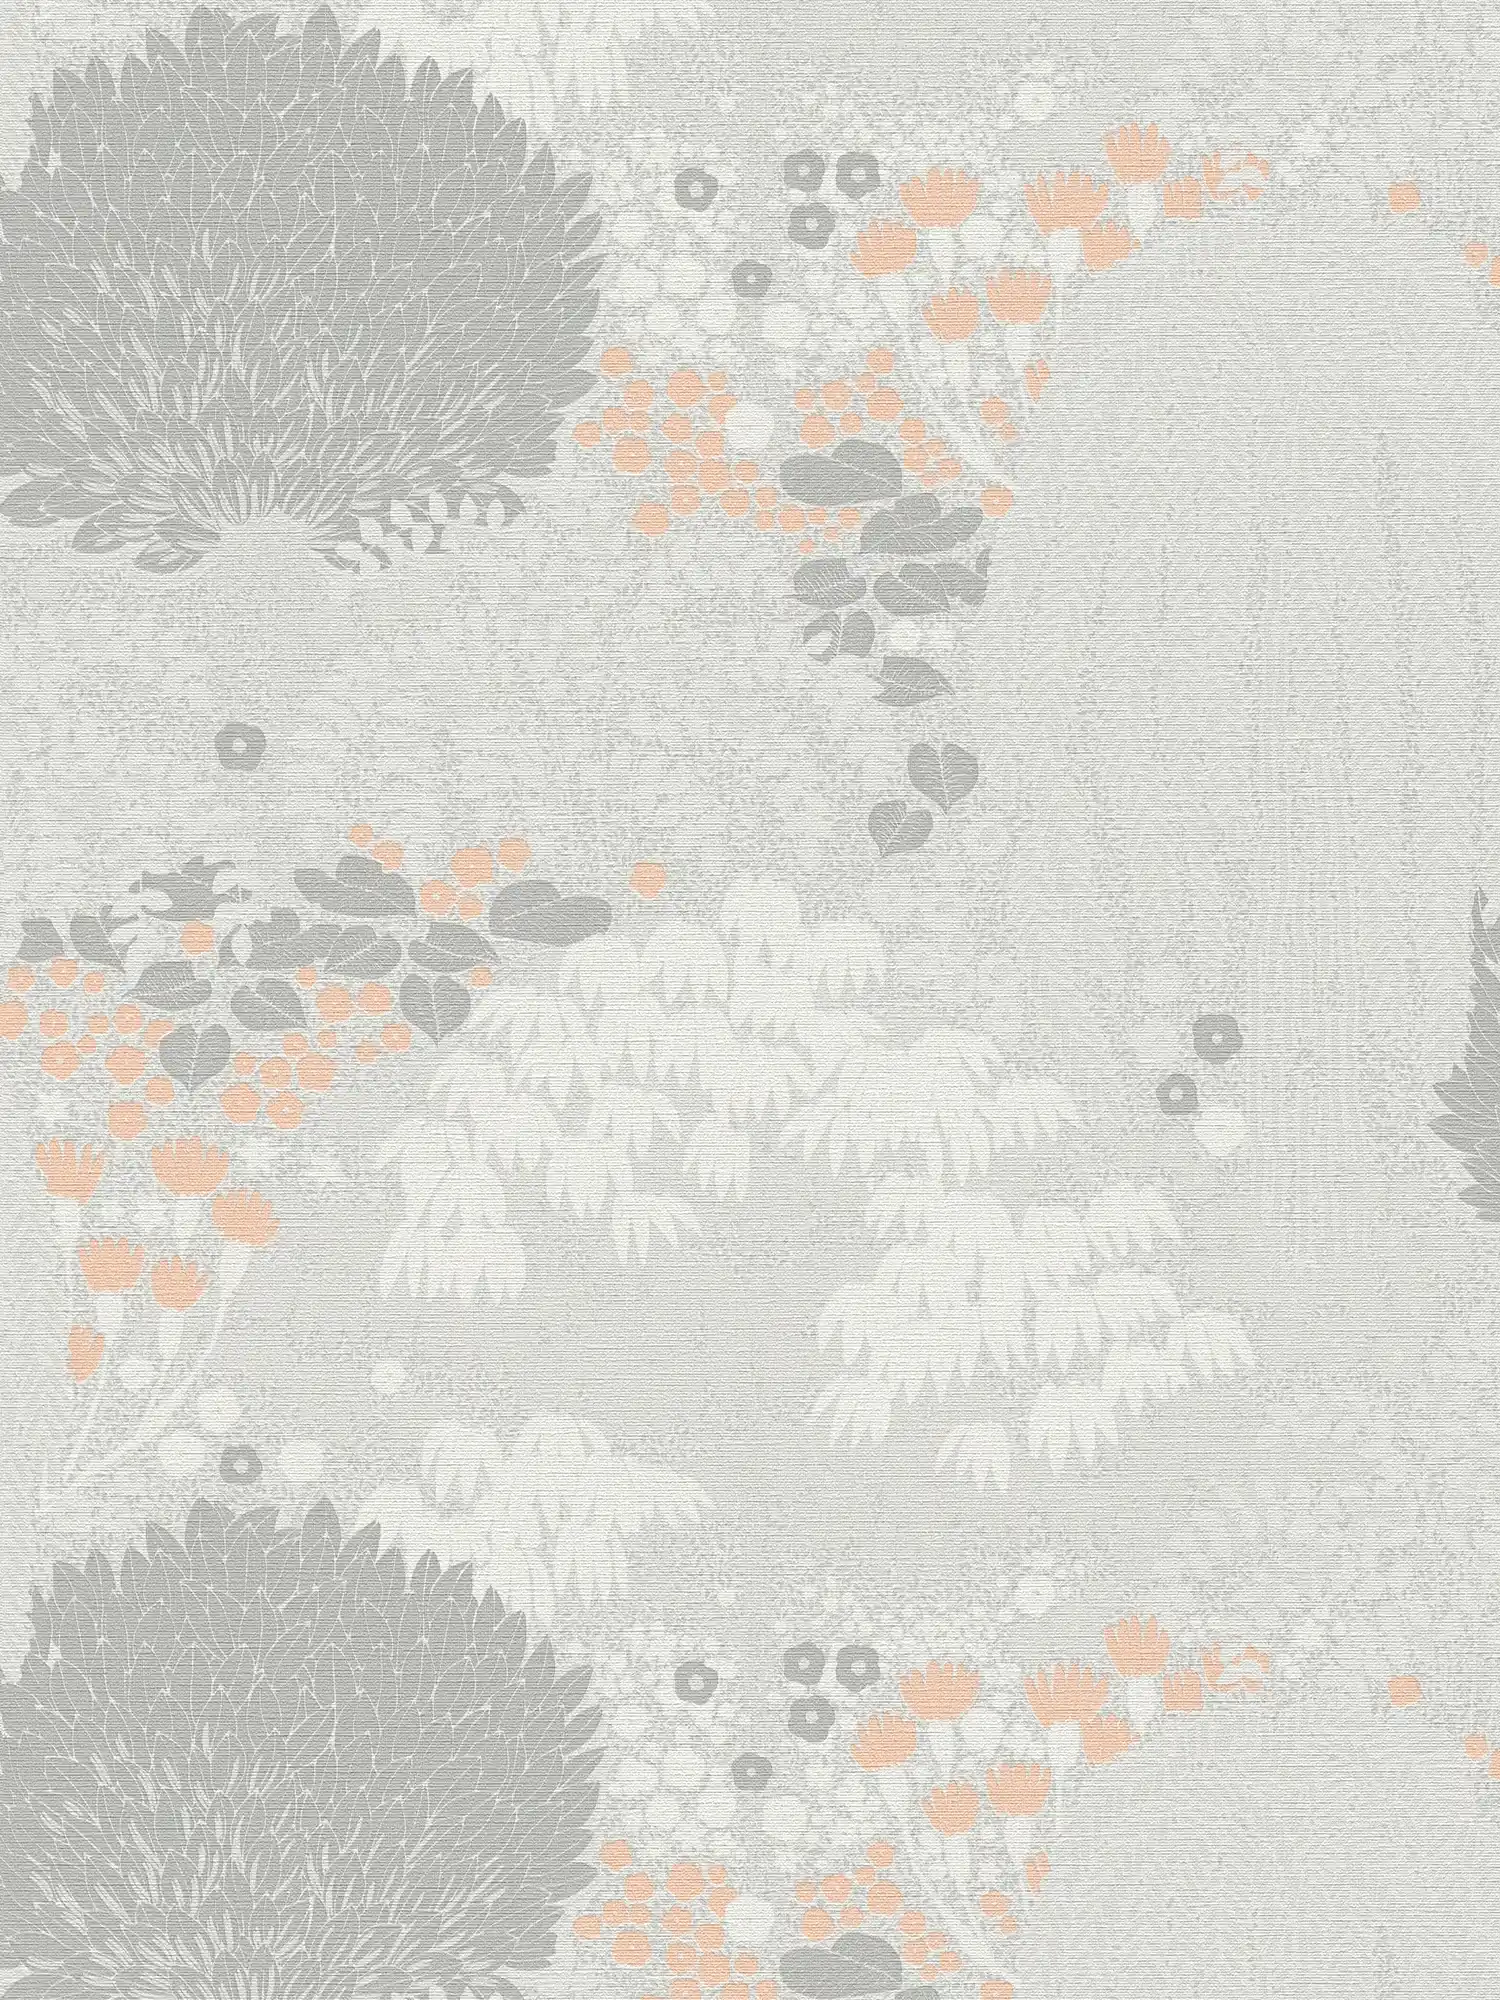         Floral non-woven wallpaper with leaves light textured, matt - light grey, white, pink
    